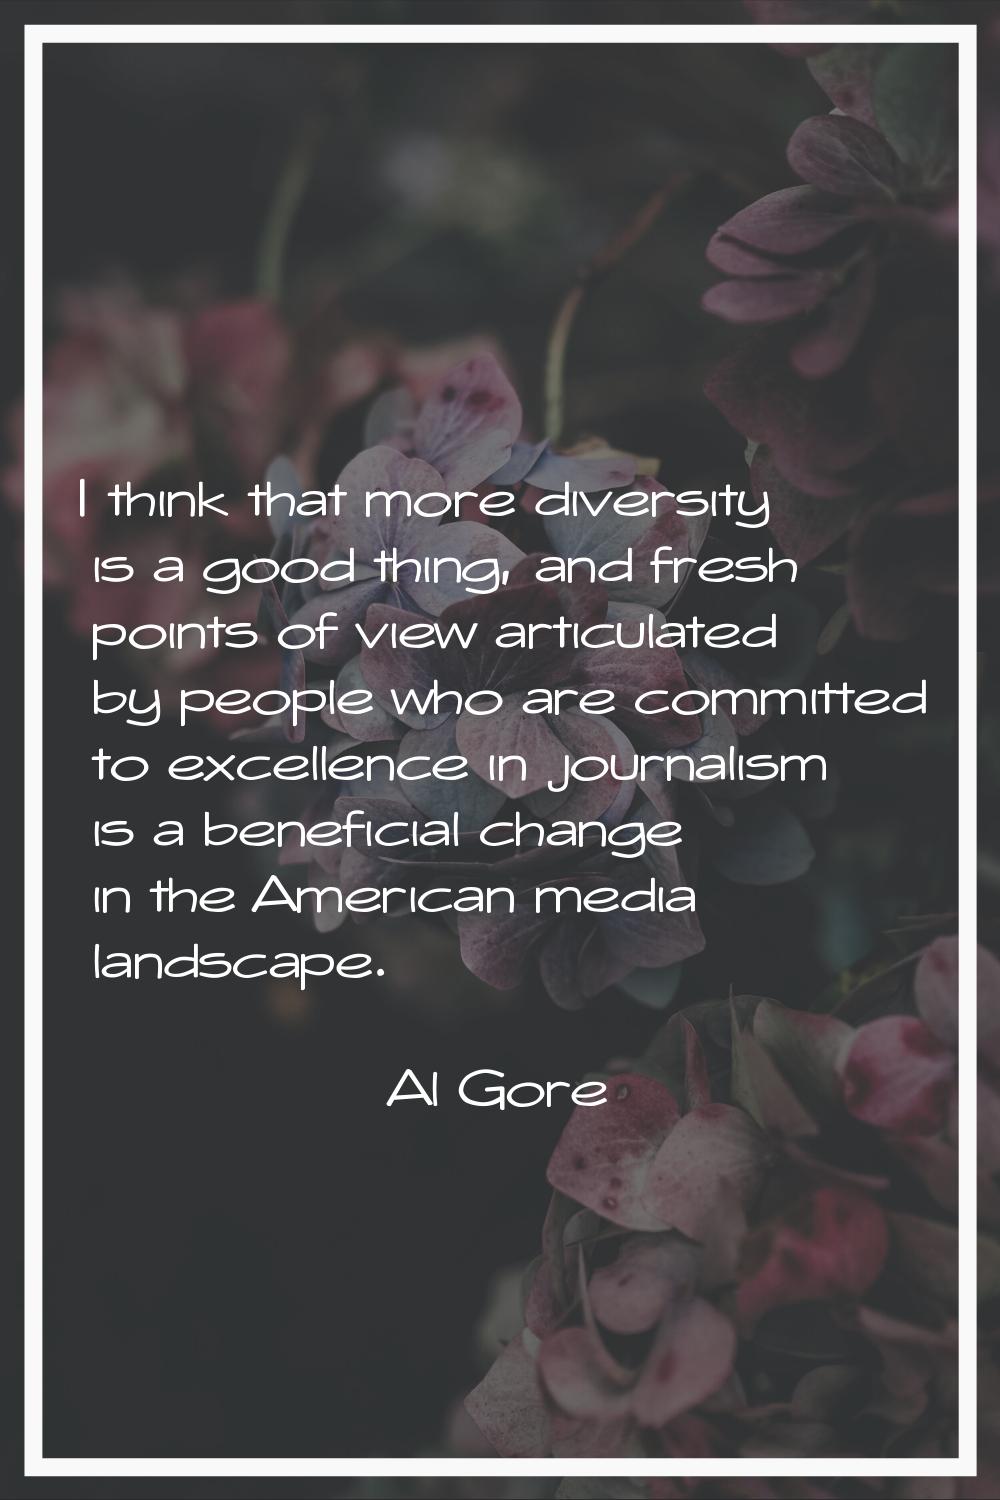 I think that more diversity is a good thing, and fresh points of view articulated by people who are